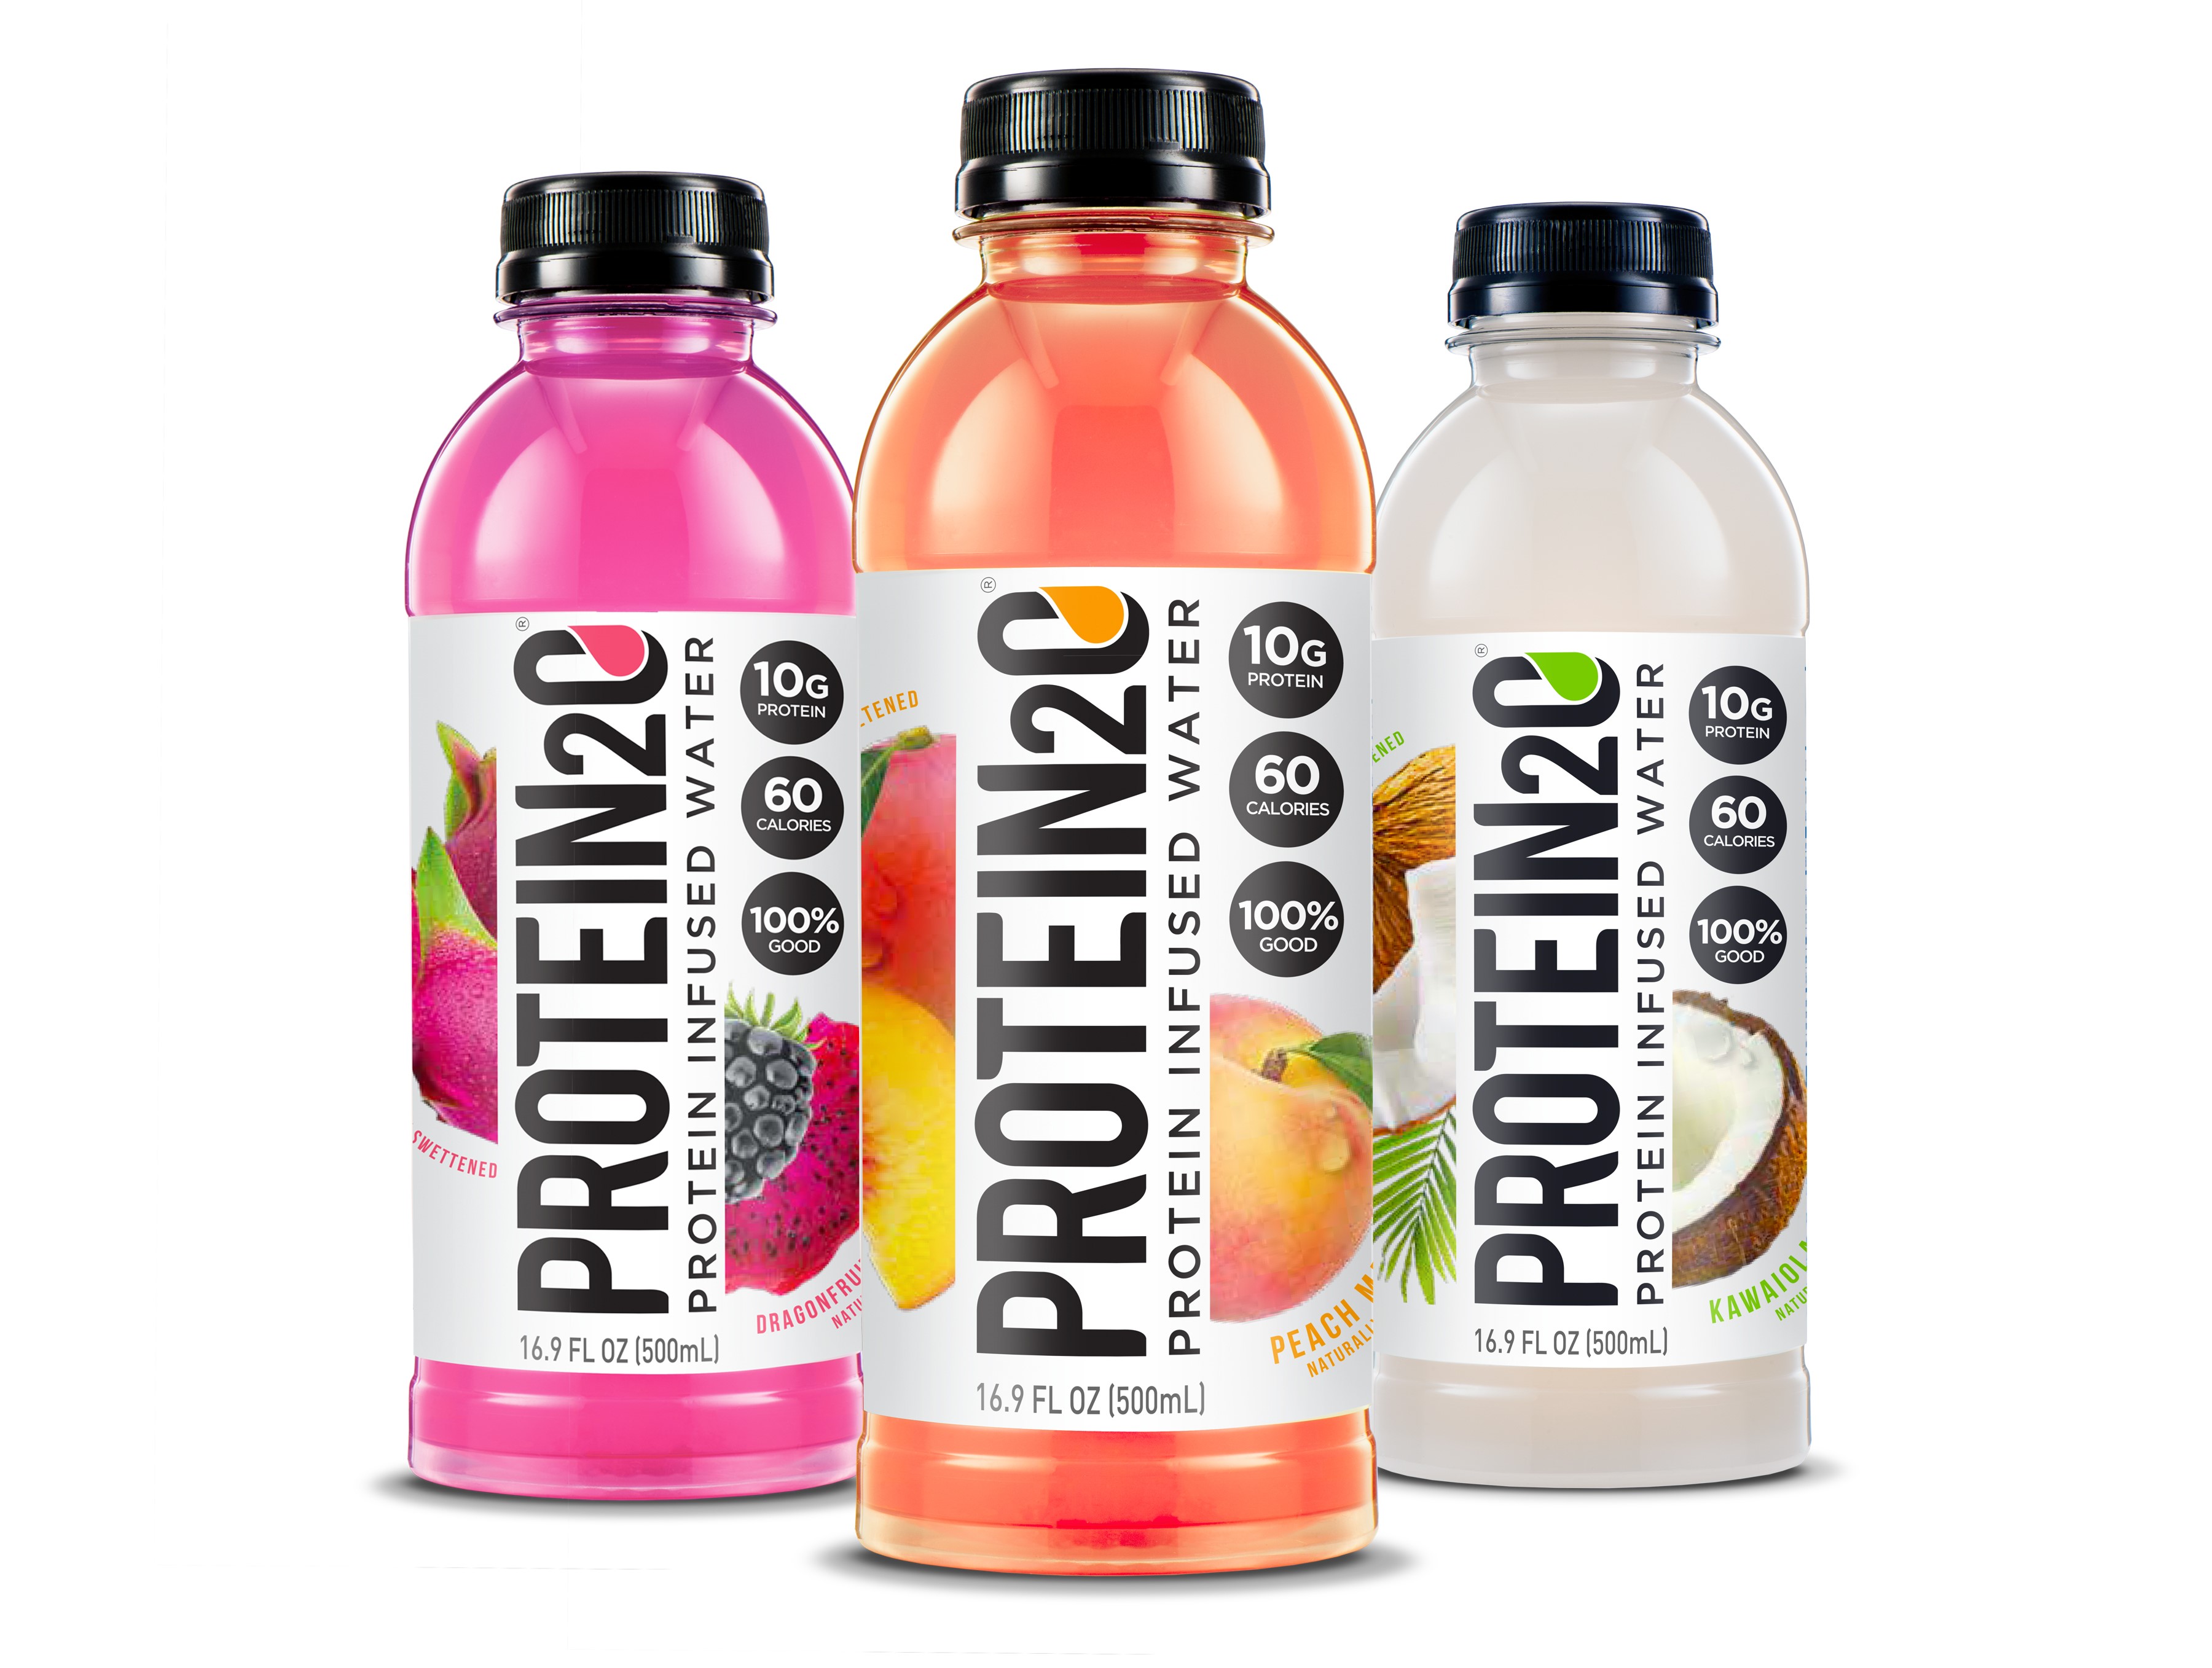 Protein2o expands southeast with Publix